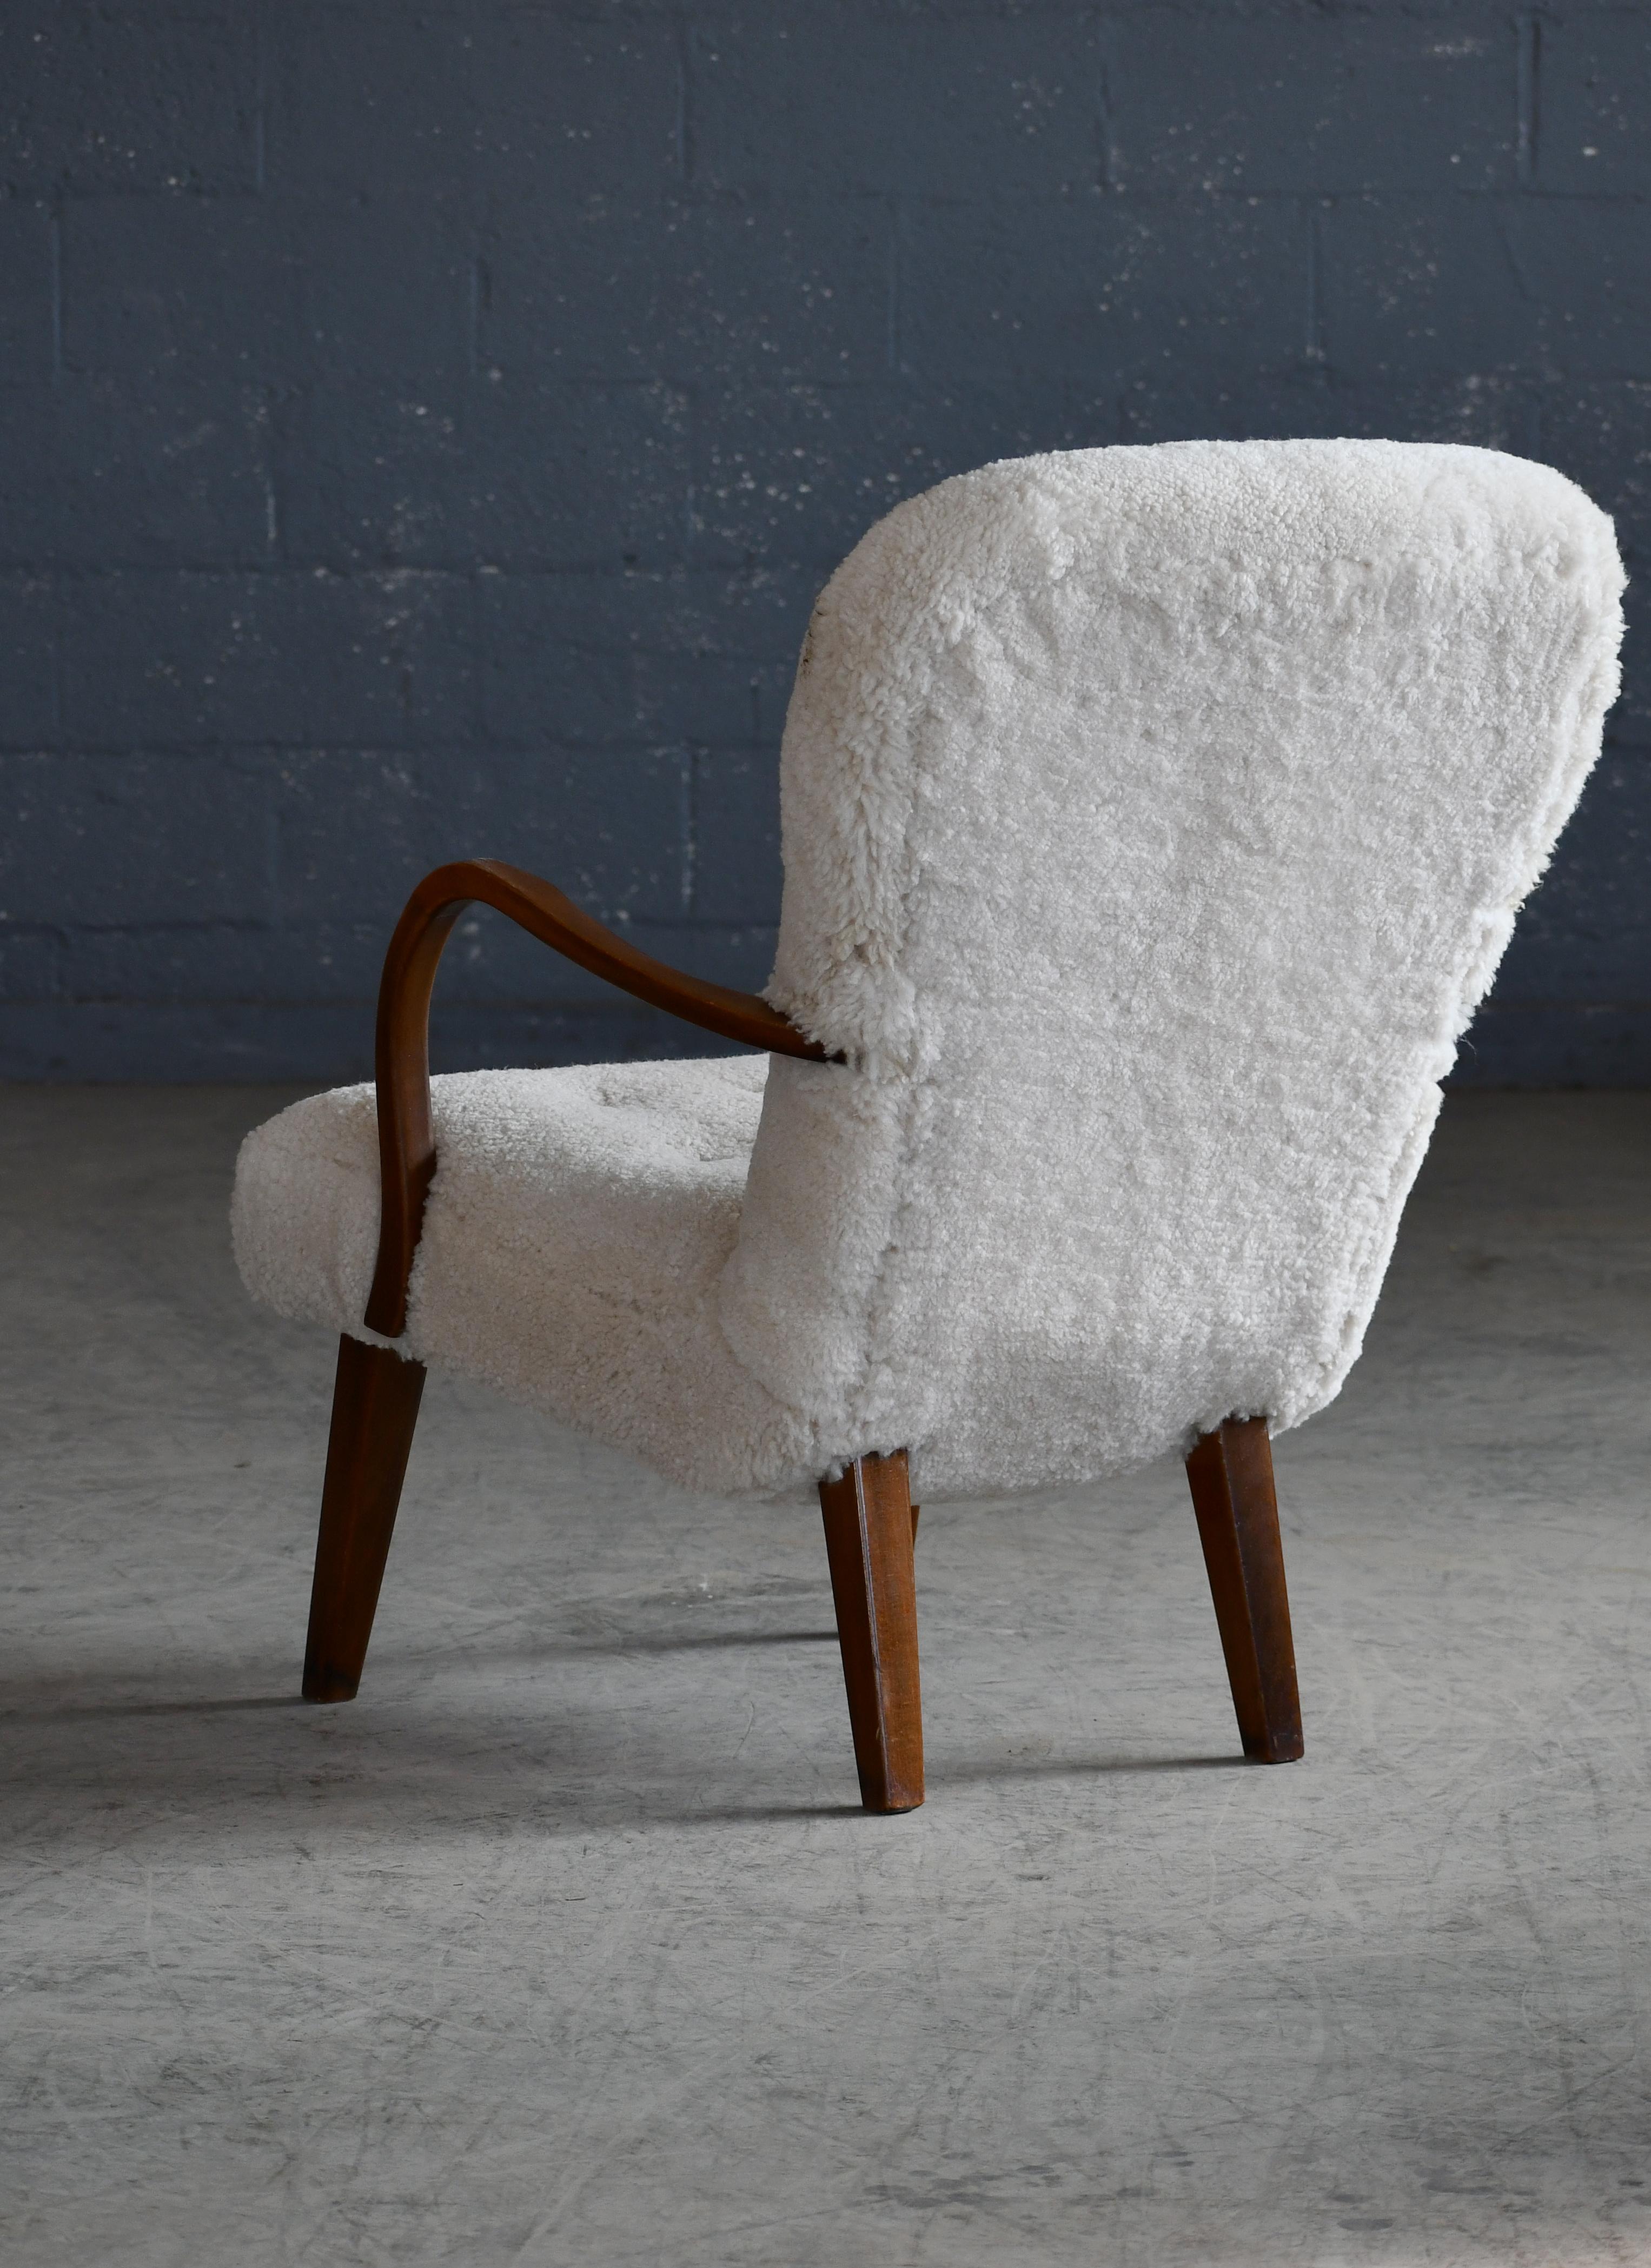 Midcentury Danish Clam Style Lounge Chair in Luxurious Sheepskin, 1950s For Sale 4